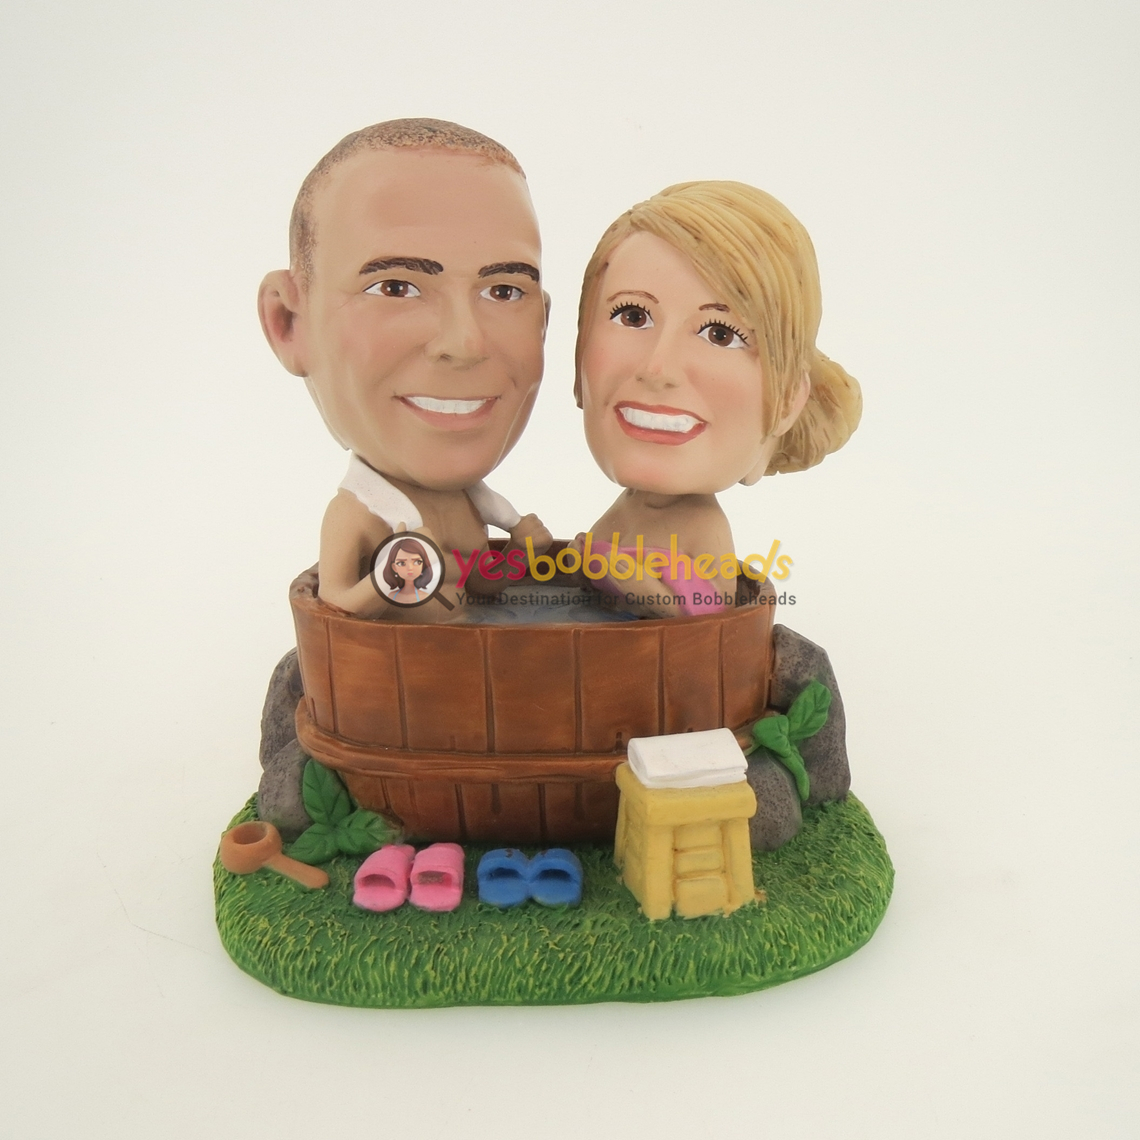 Picture of Custom Bobblehead Doll: Funny Bathing Couple